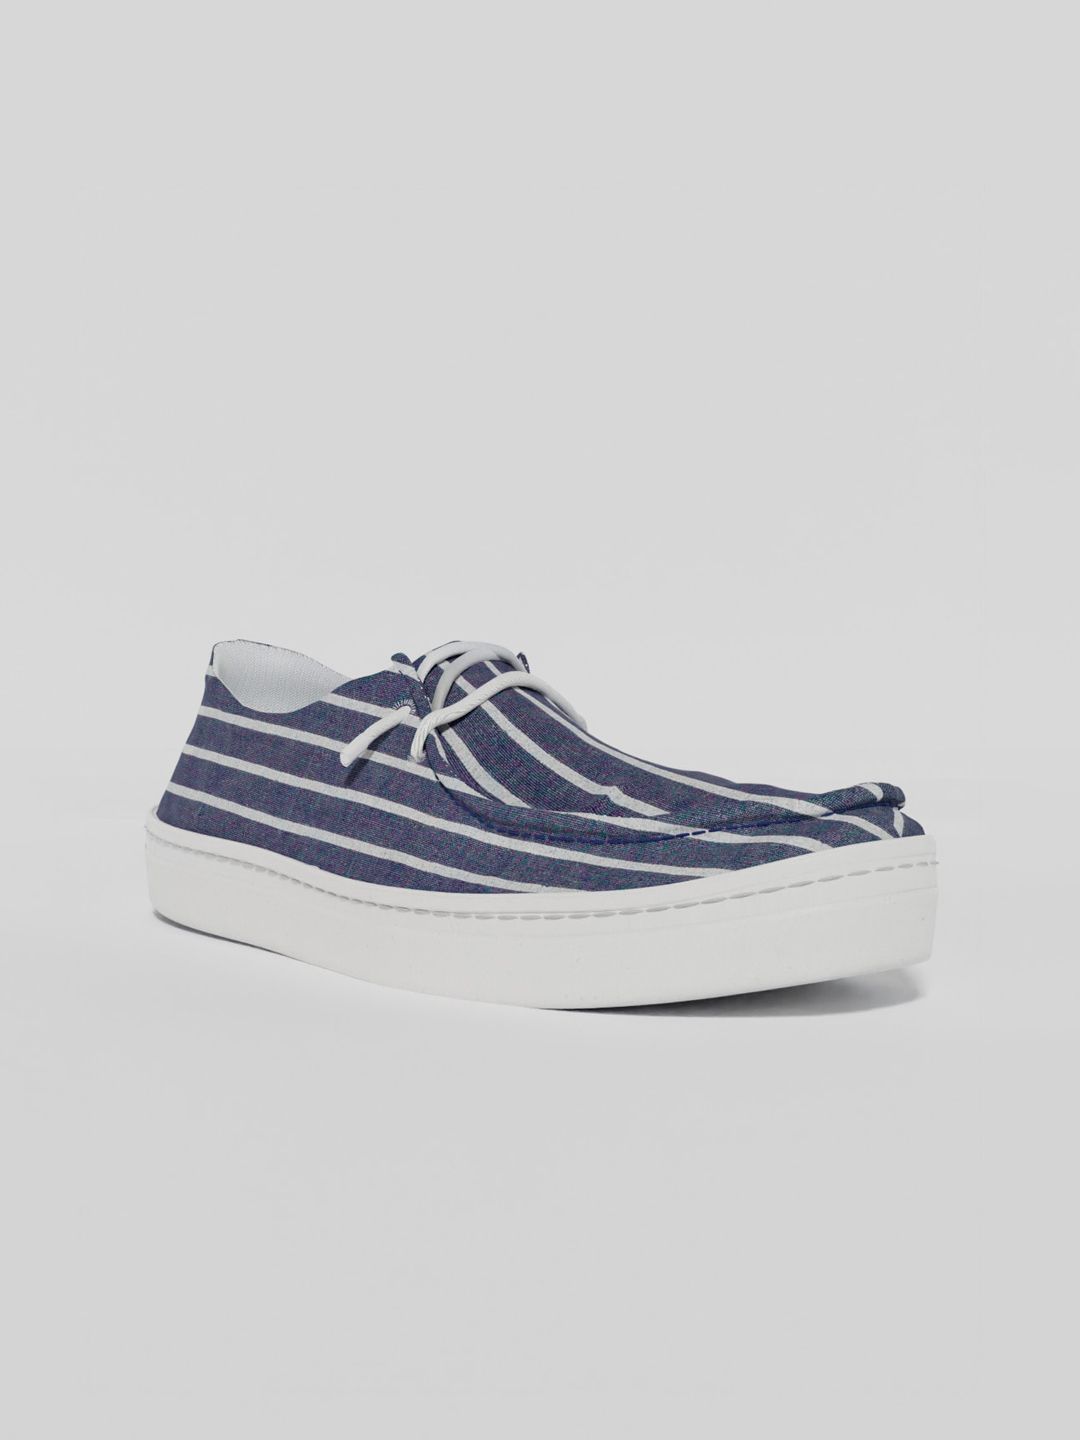 LOKAIT The Sneakers Company Women Blue Striped Sneakers Price in India